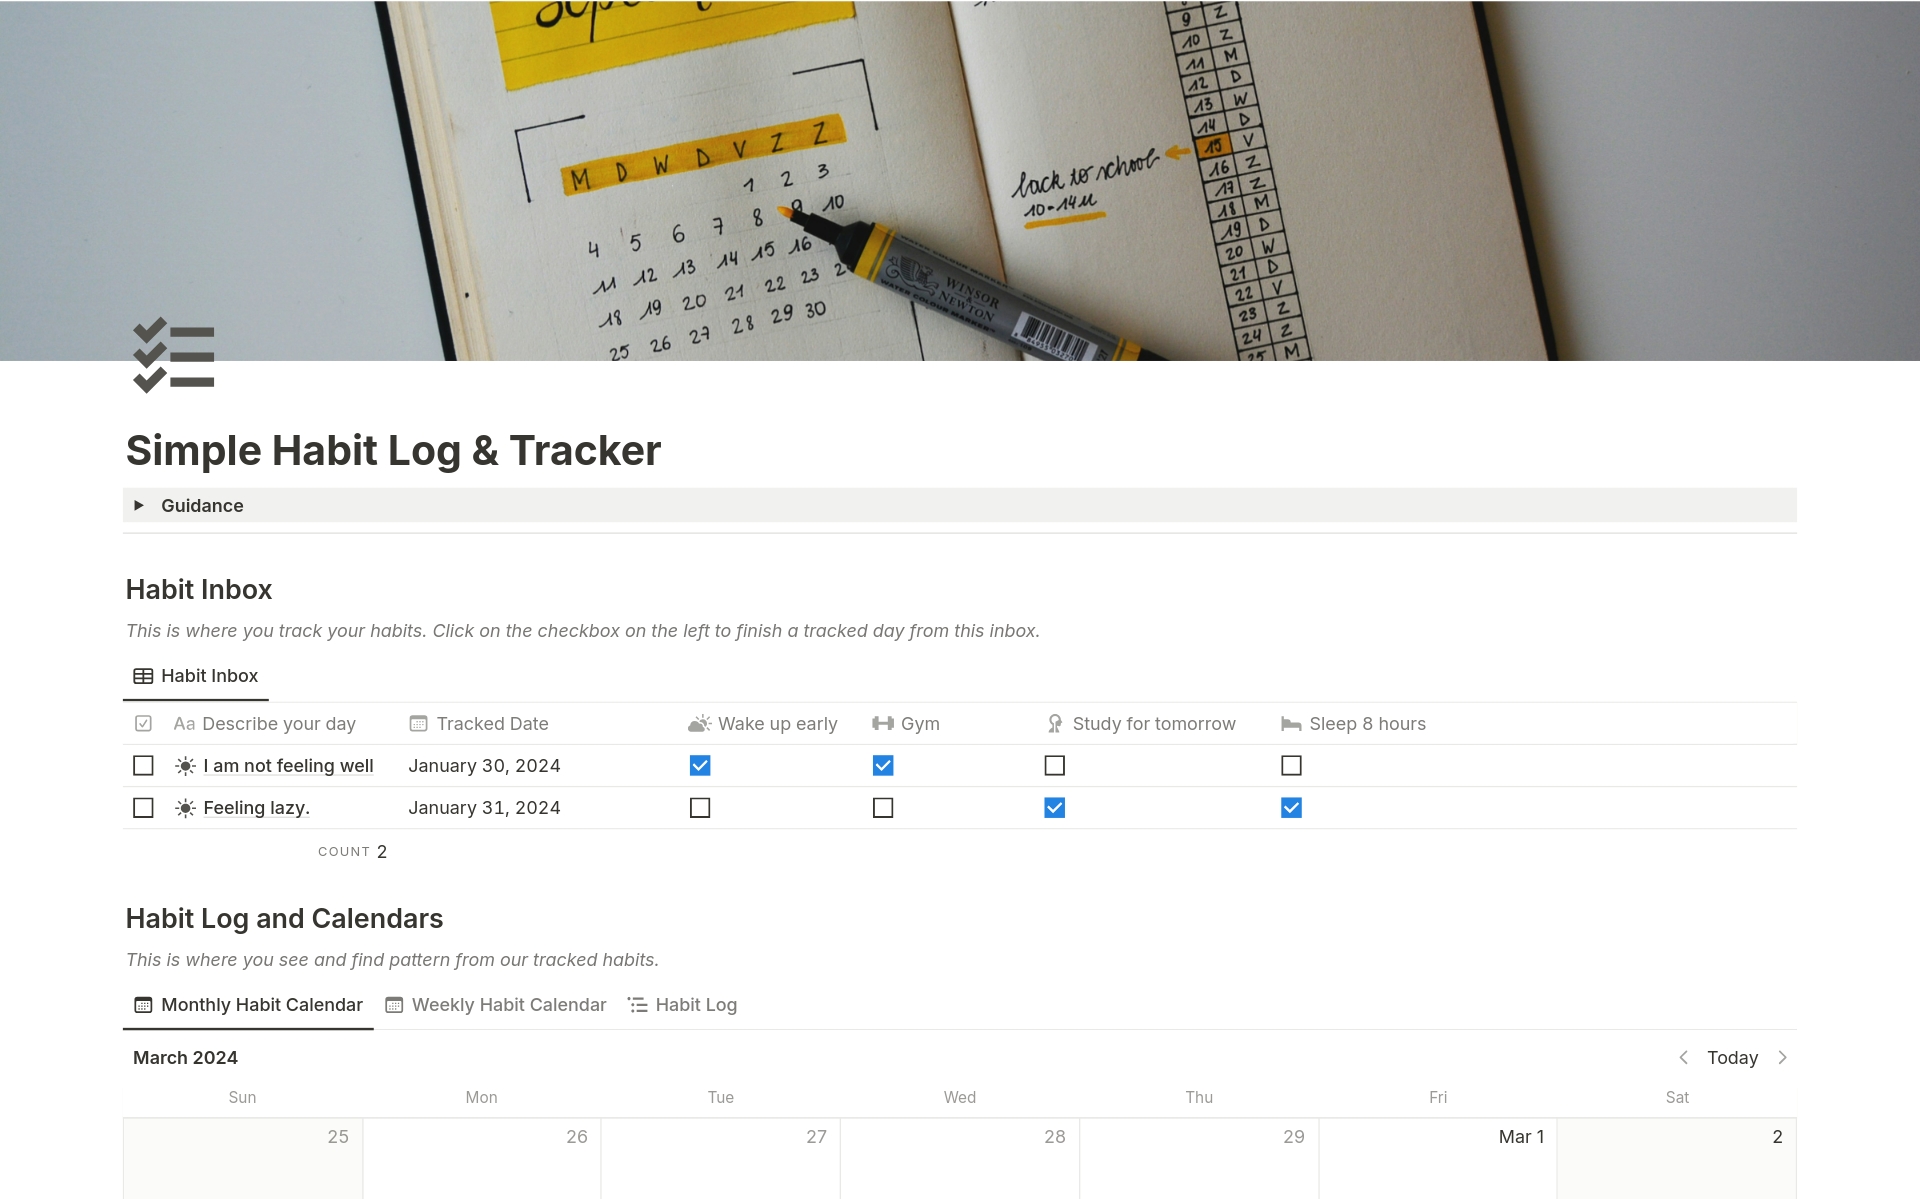 Simple Habit Tracker is the simplest habit tracker in Notion designed to compile your tracked daily habit effortlessly.